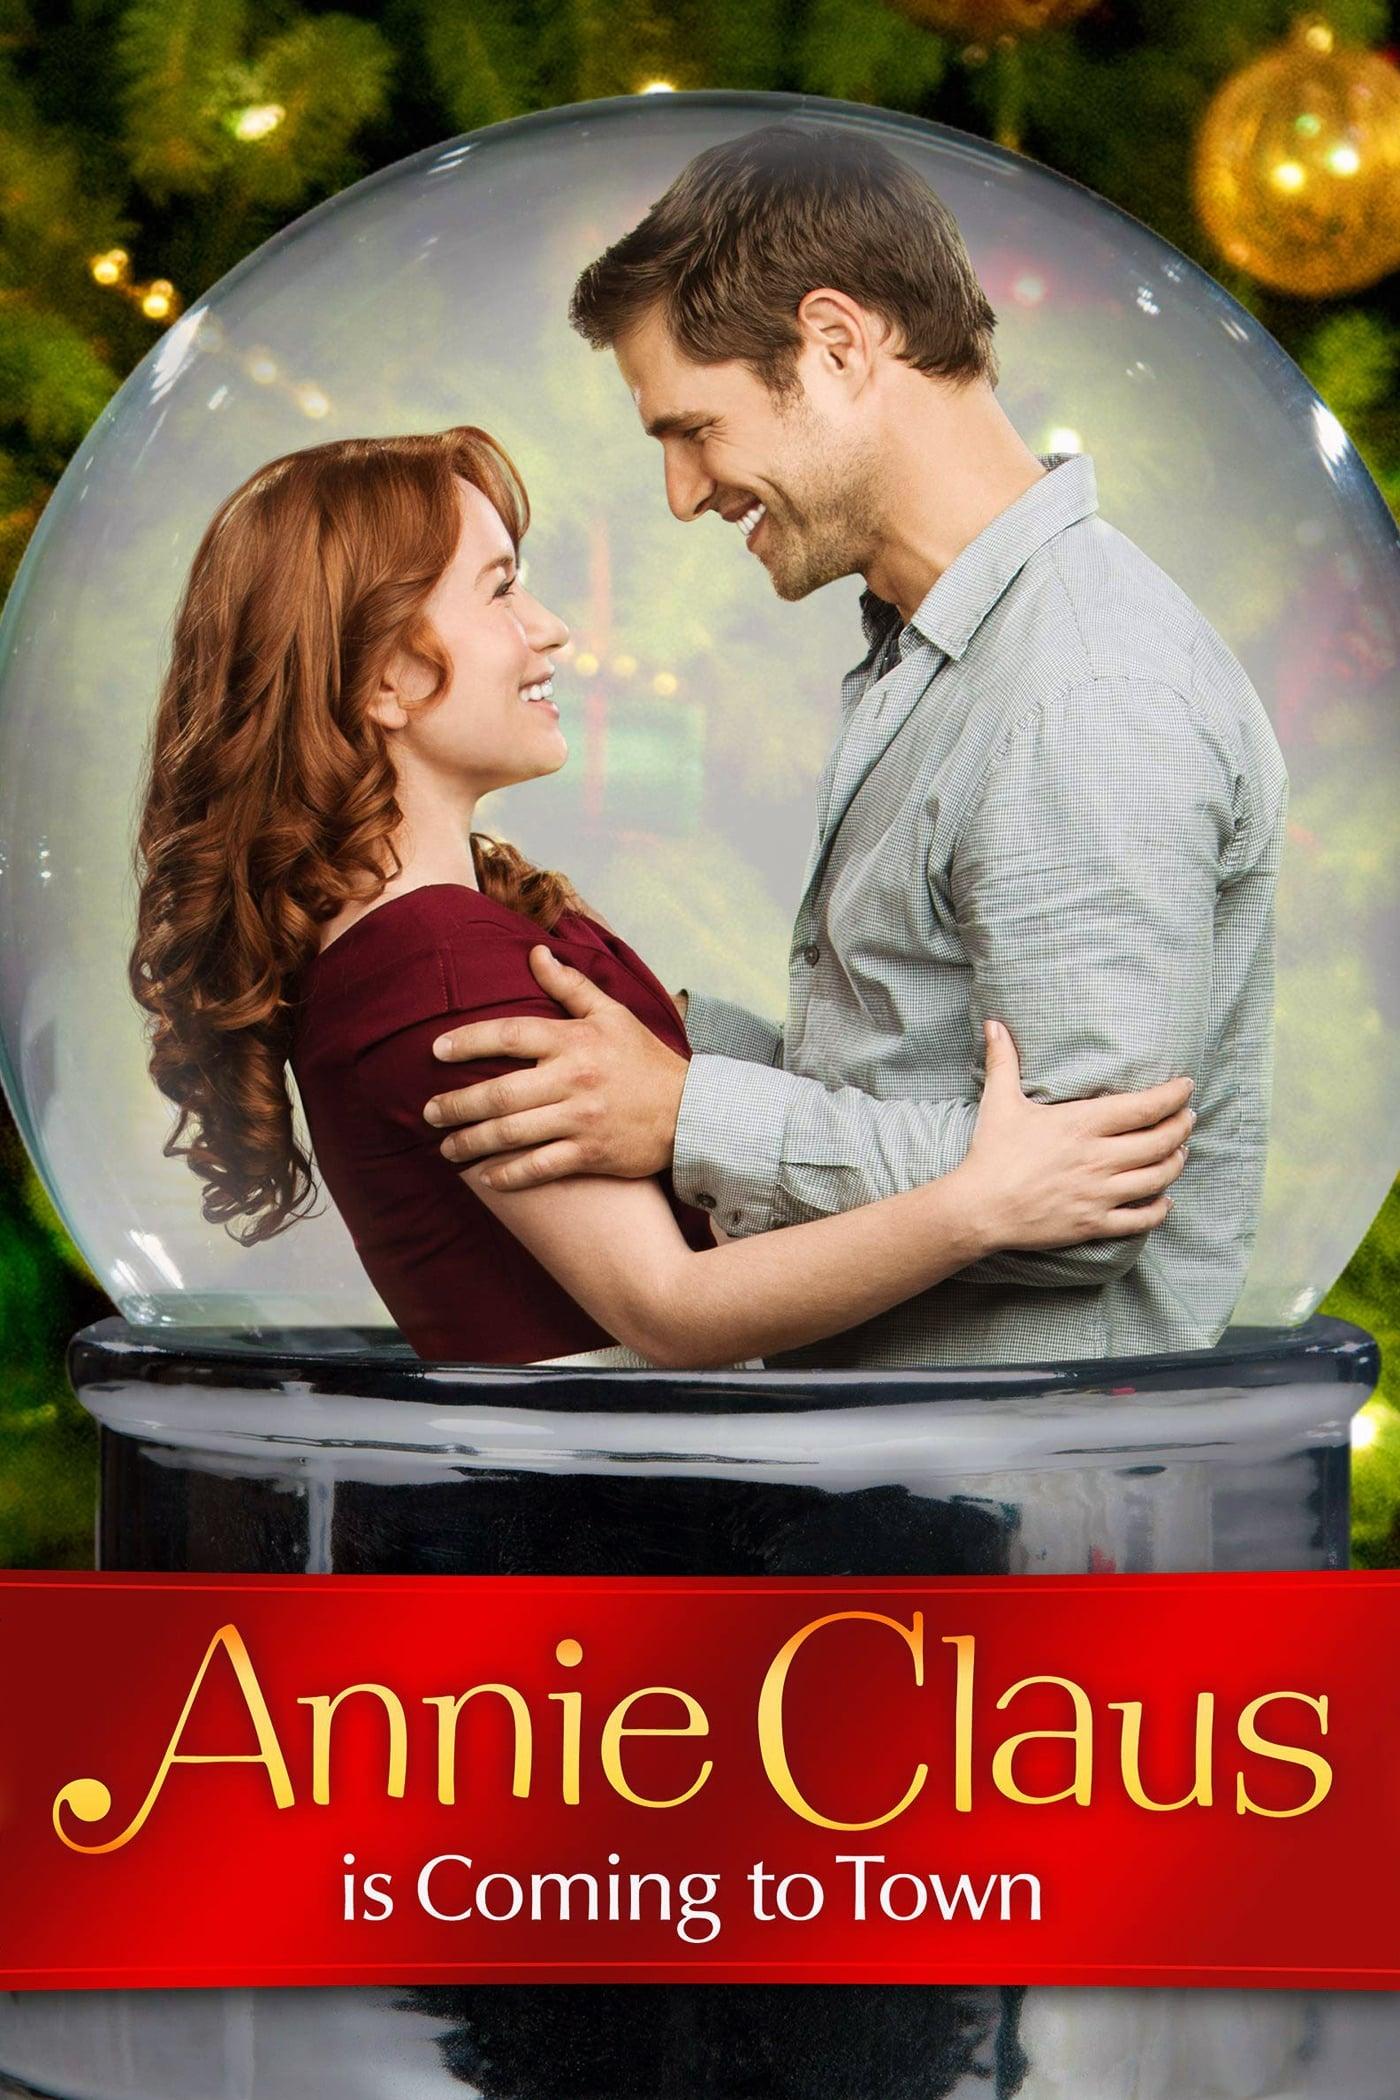 Annie Claus Is Coming to Town poster